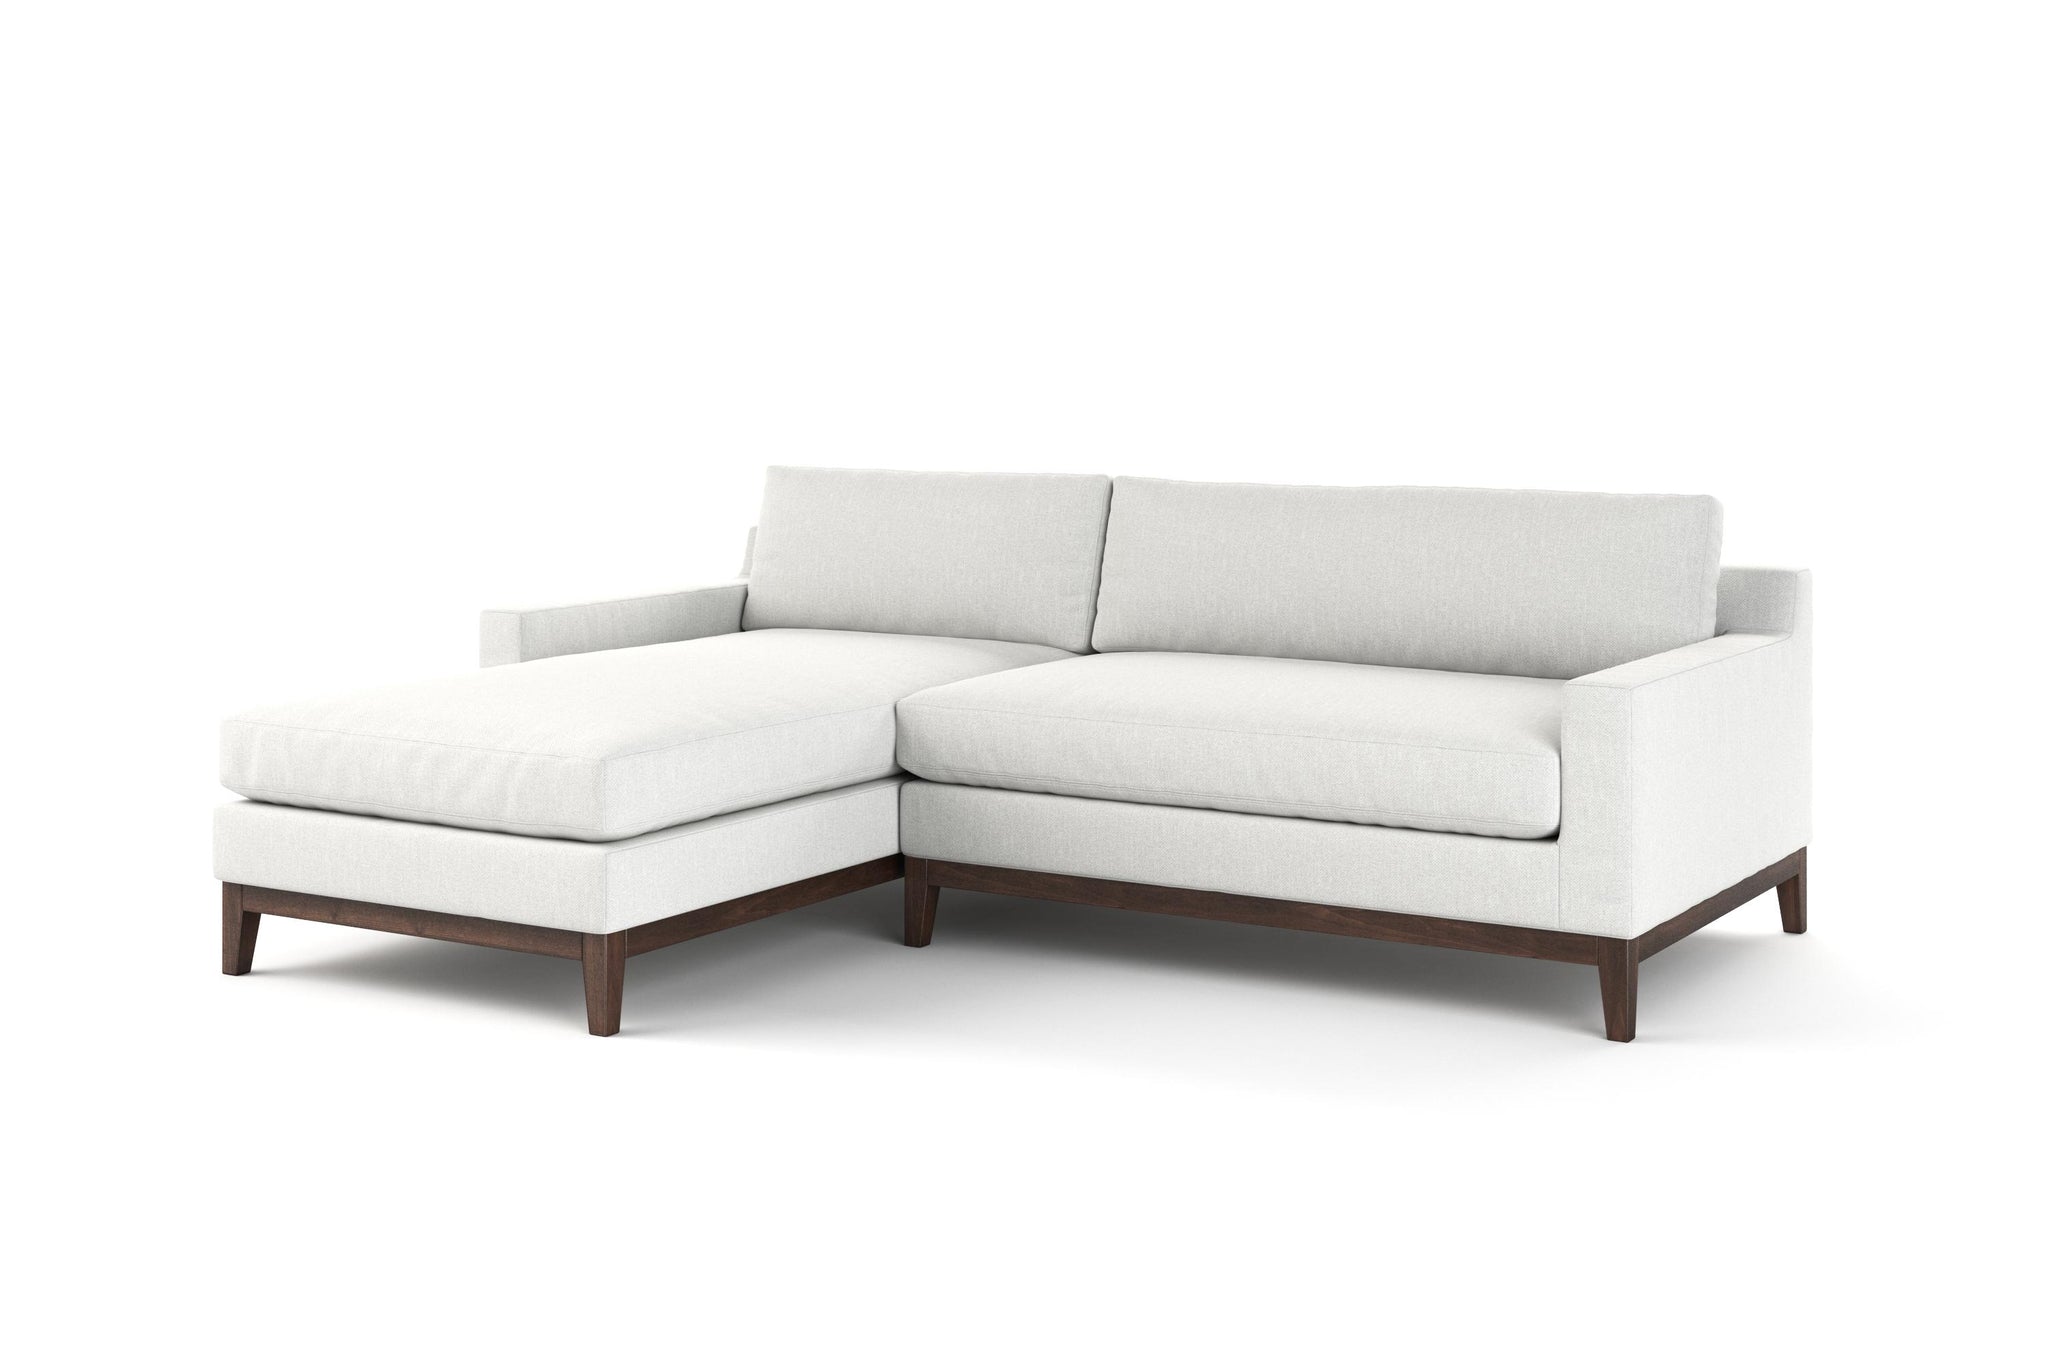 Big Sur Sofa with Chaise